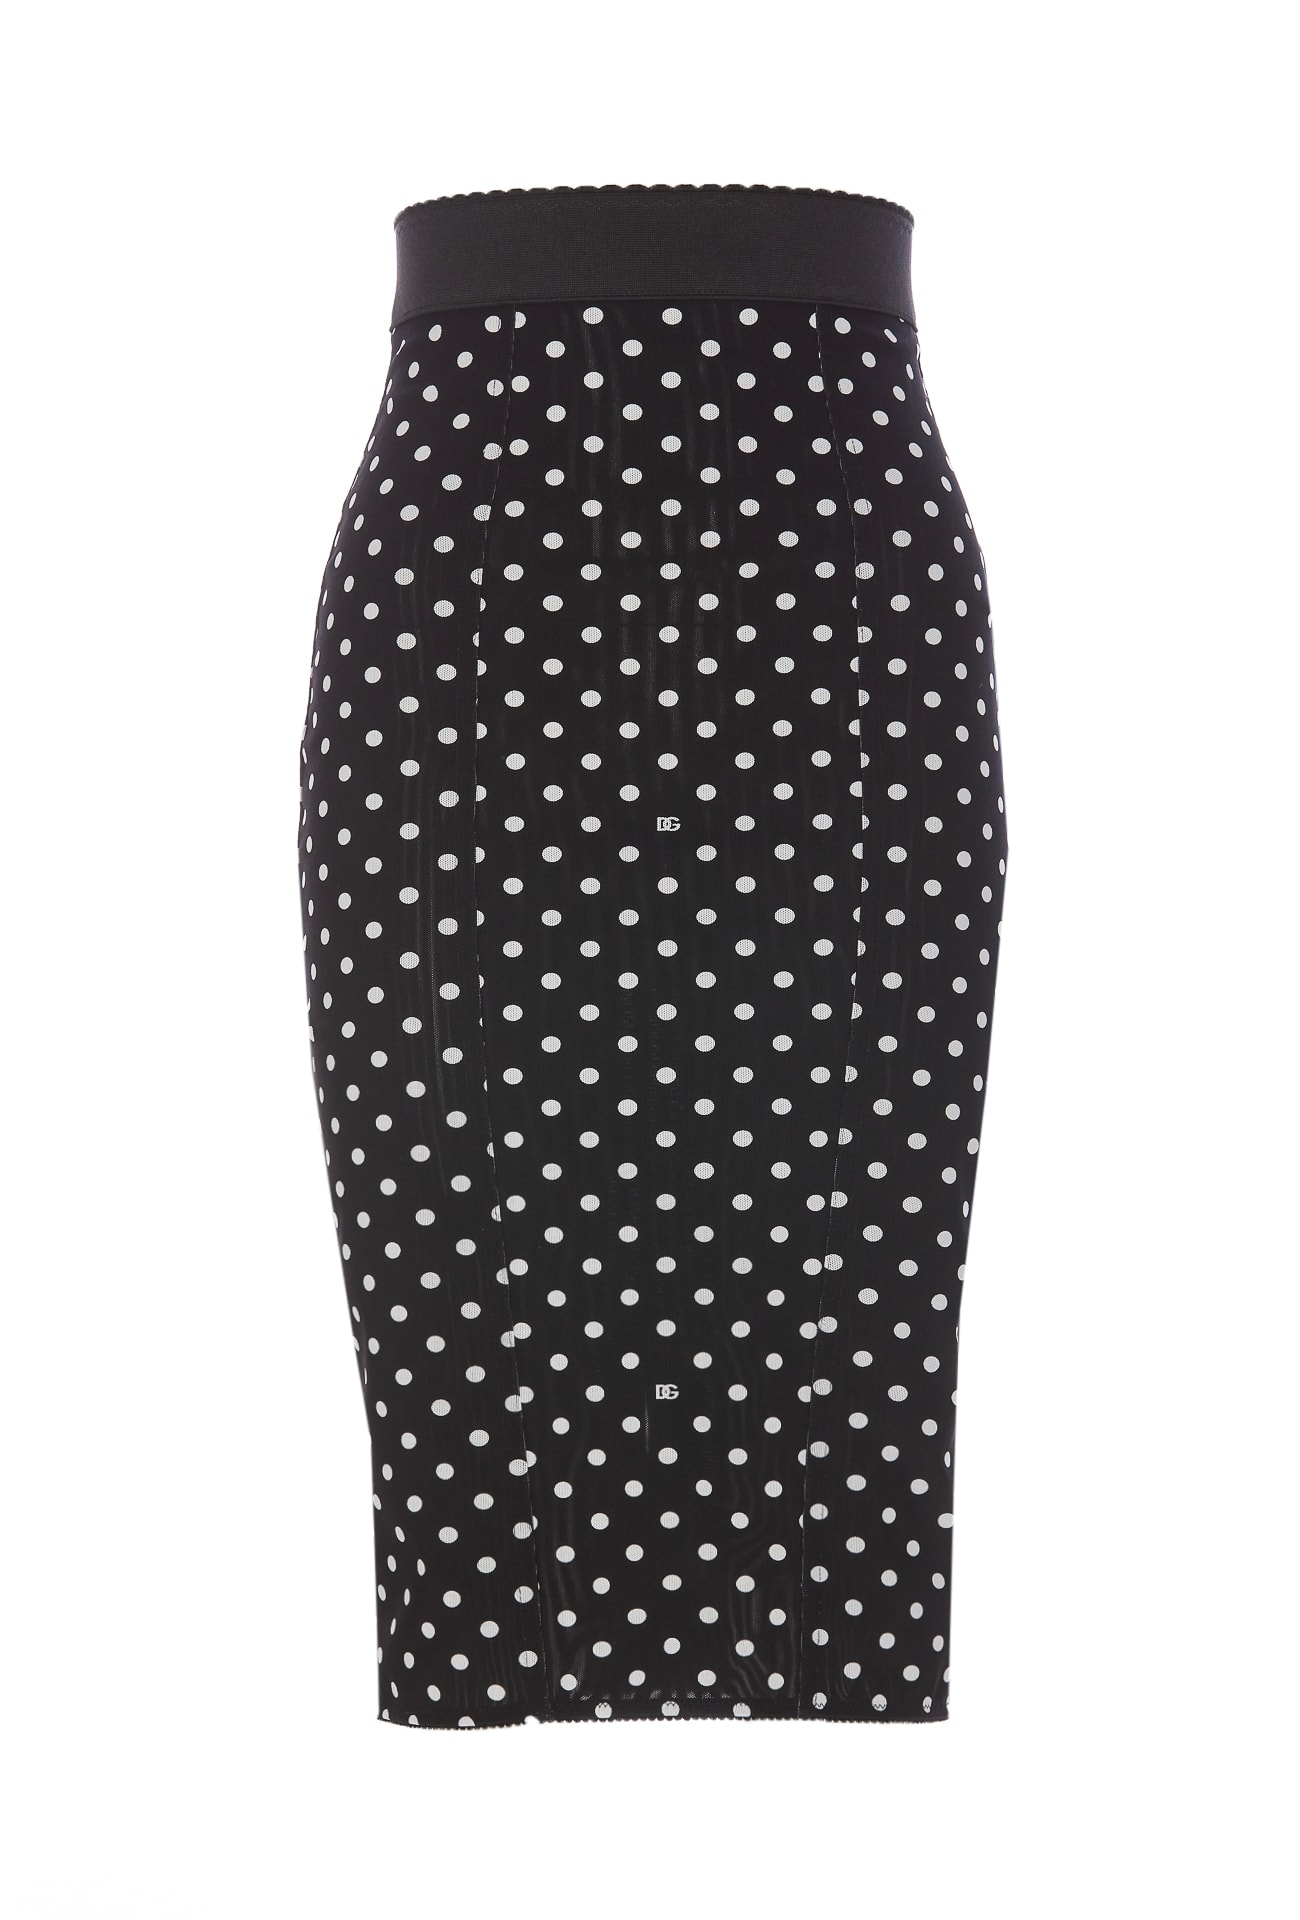 Dolce & Gabbana Marquisette Pencil Skirt With Polka Dot Print And Corset Detail In Black